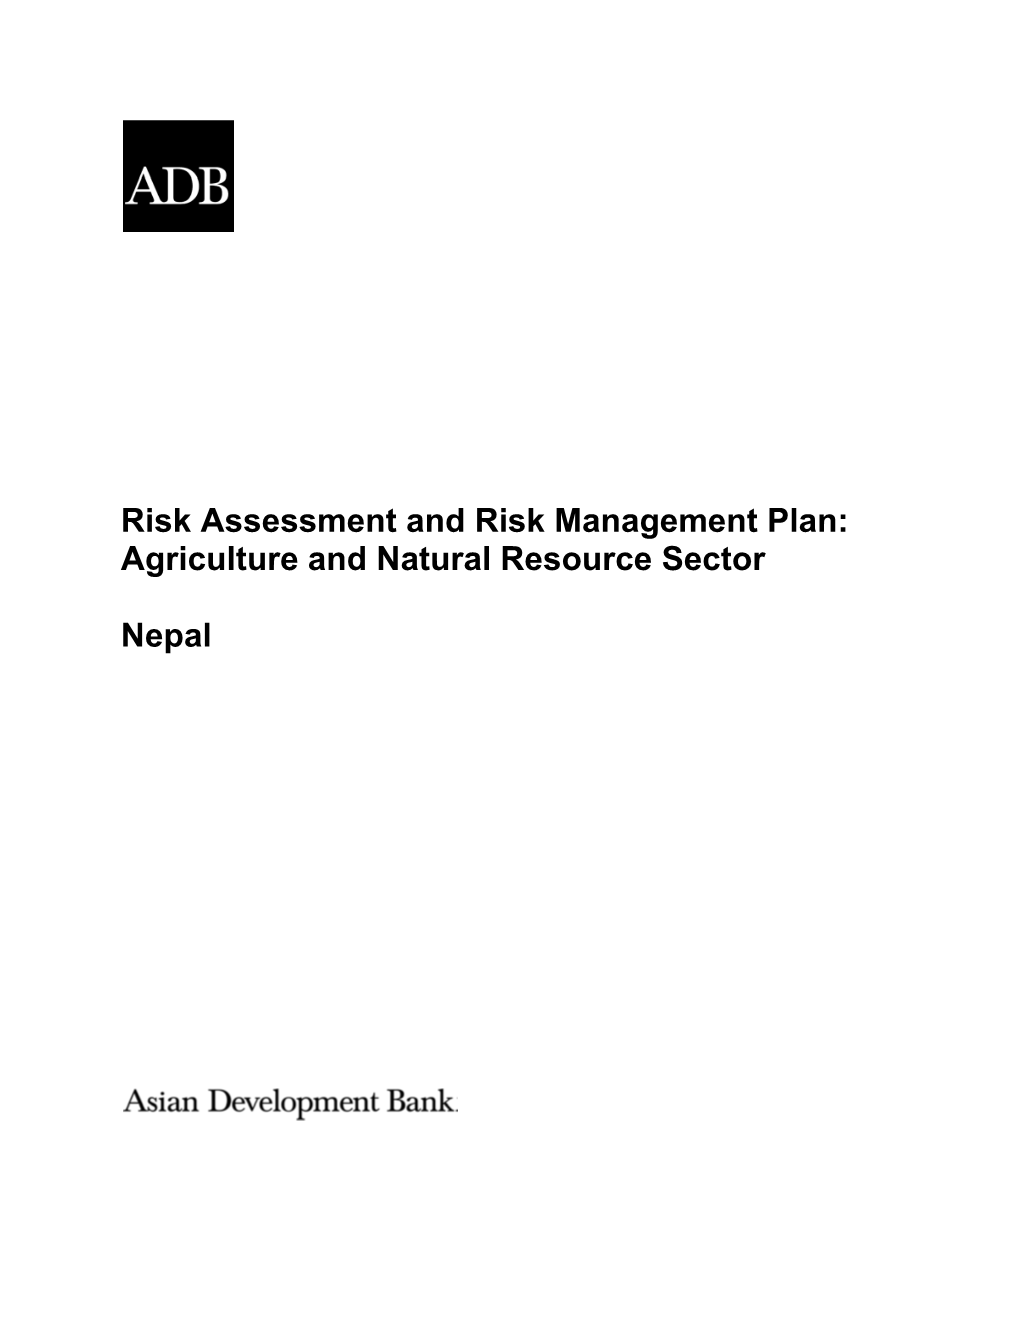 Risk Assessment and Risk Management Plan: Agriculture and Natural Resource Sector